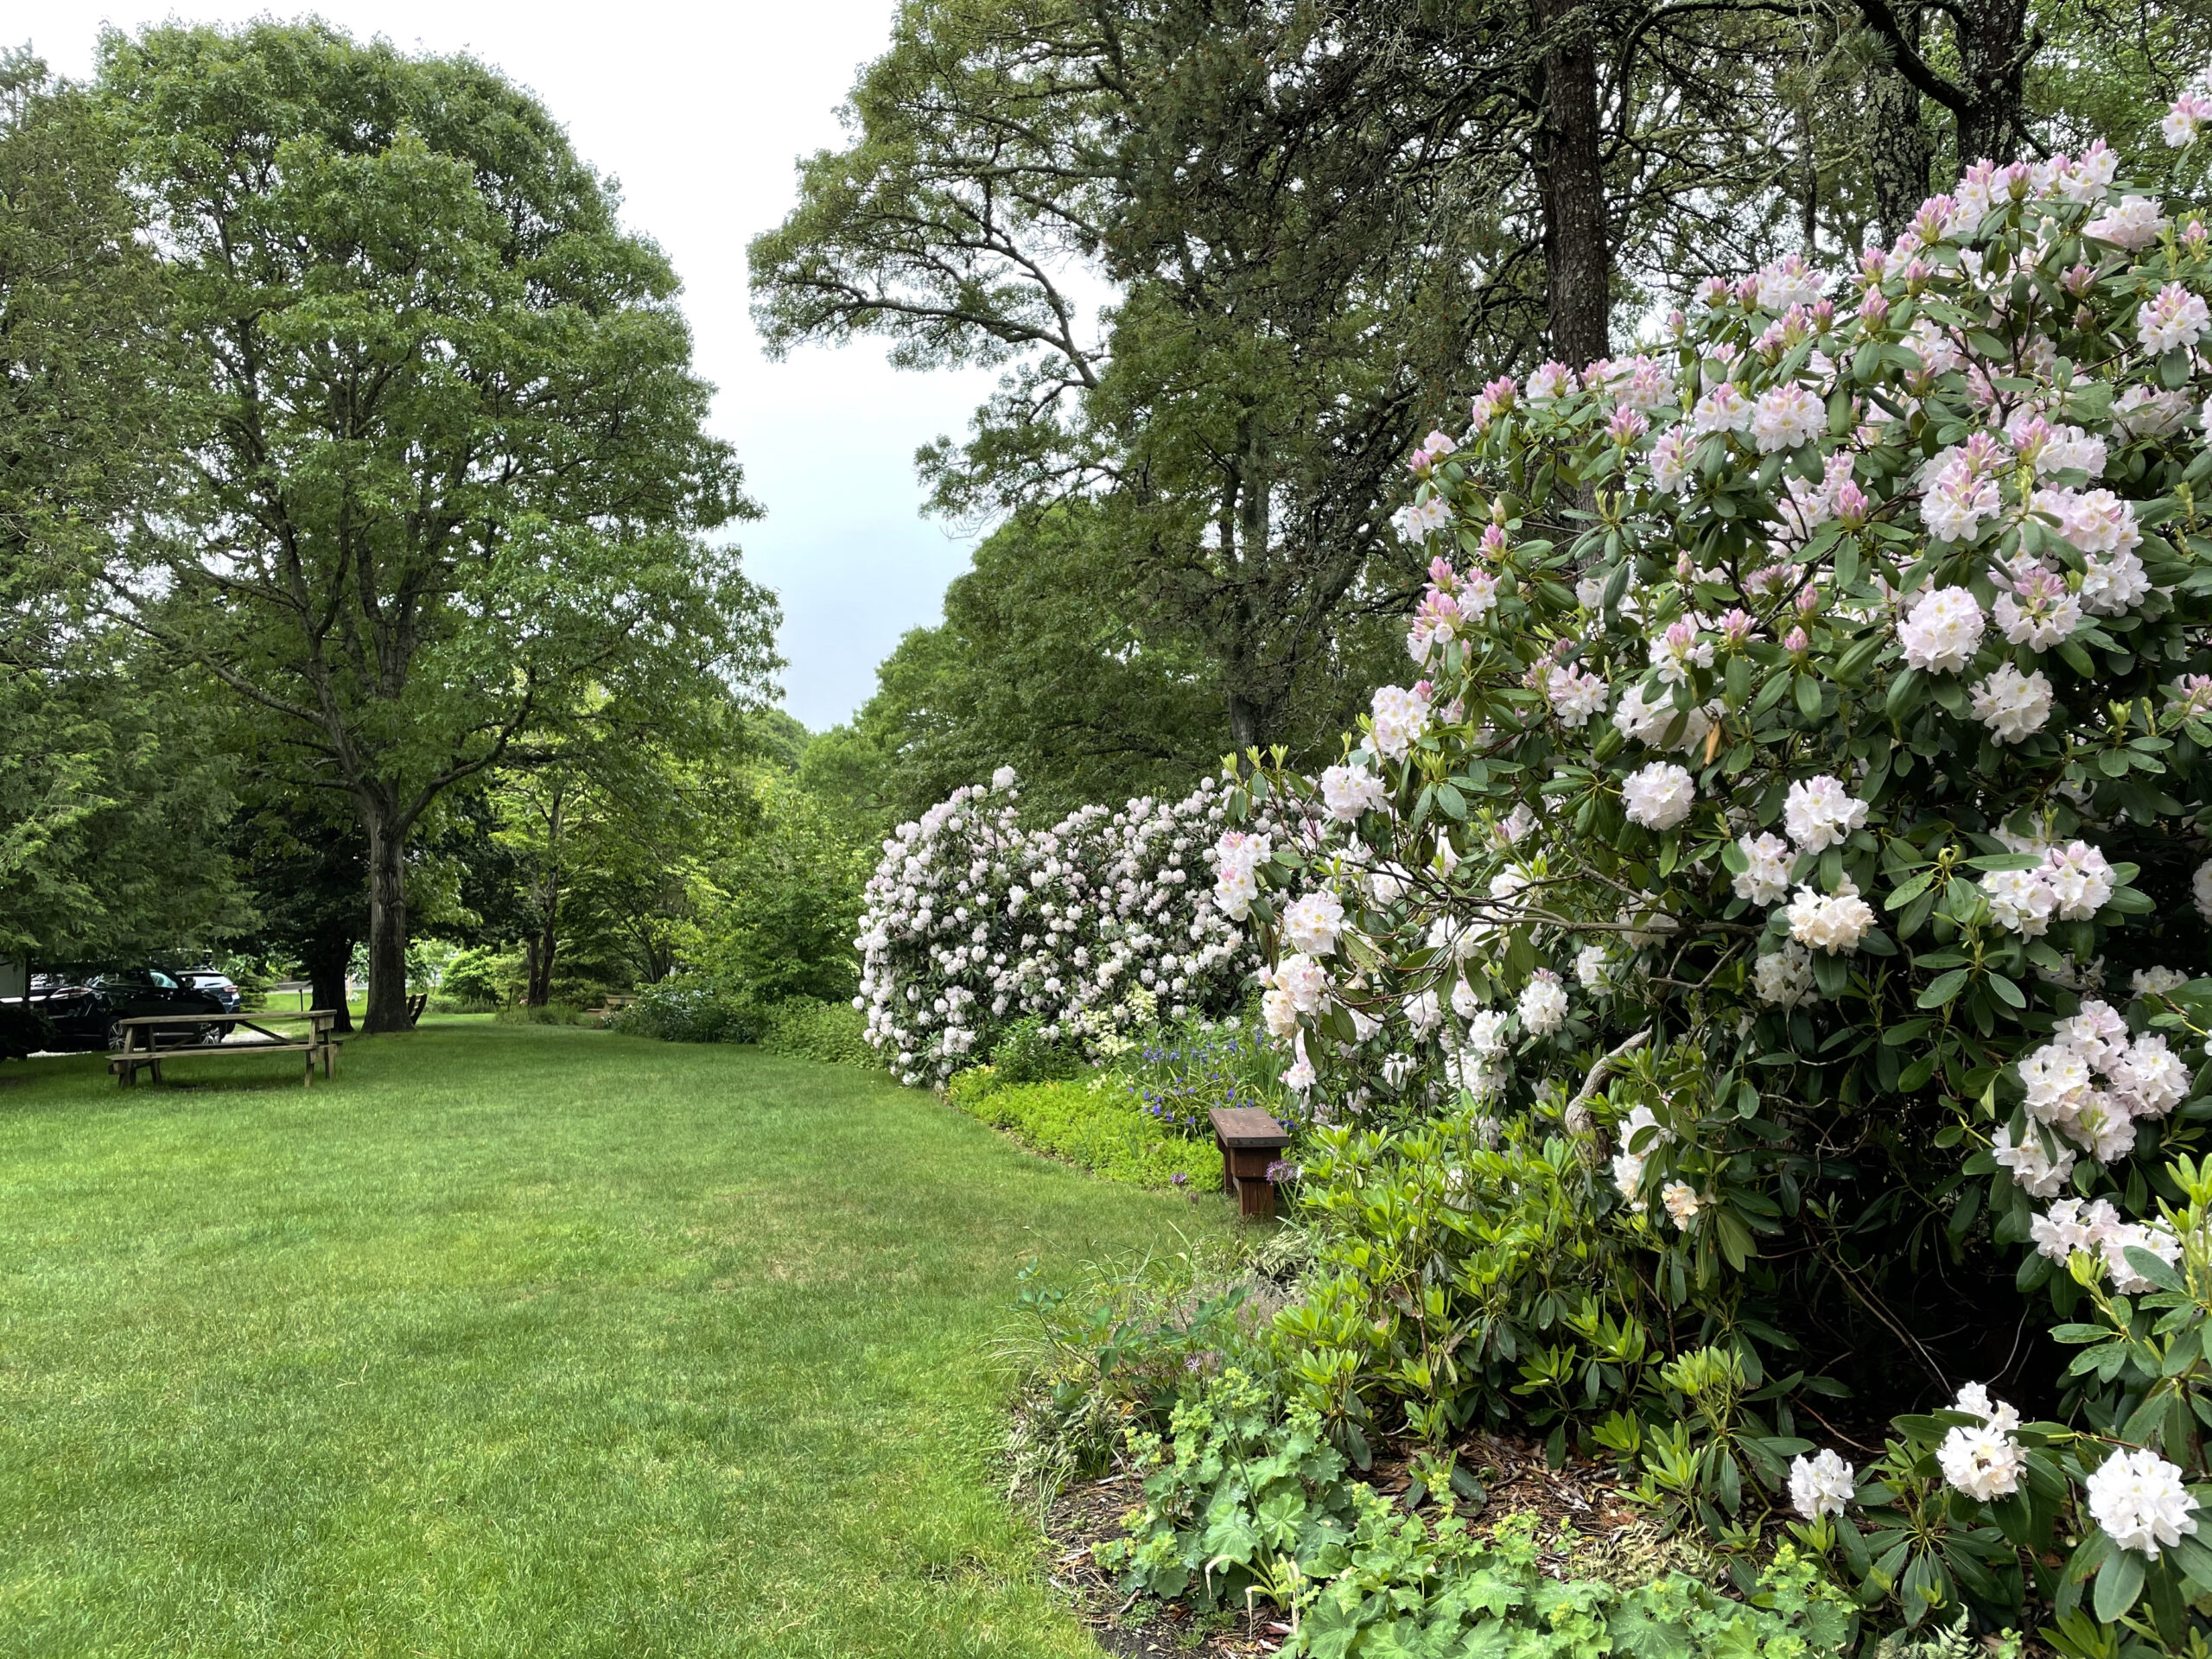 Flowering shrubs and green lawn at Armstrong Kelley park in Osterville